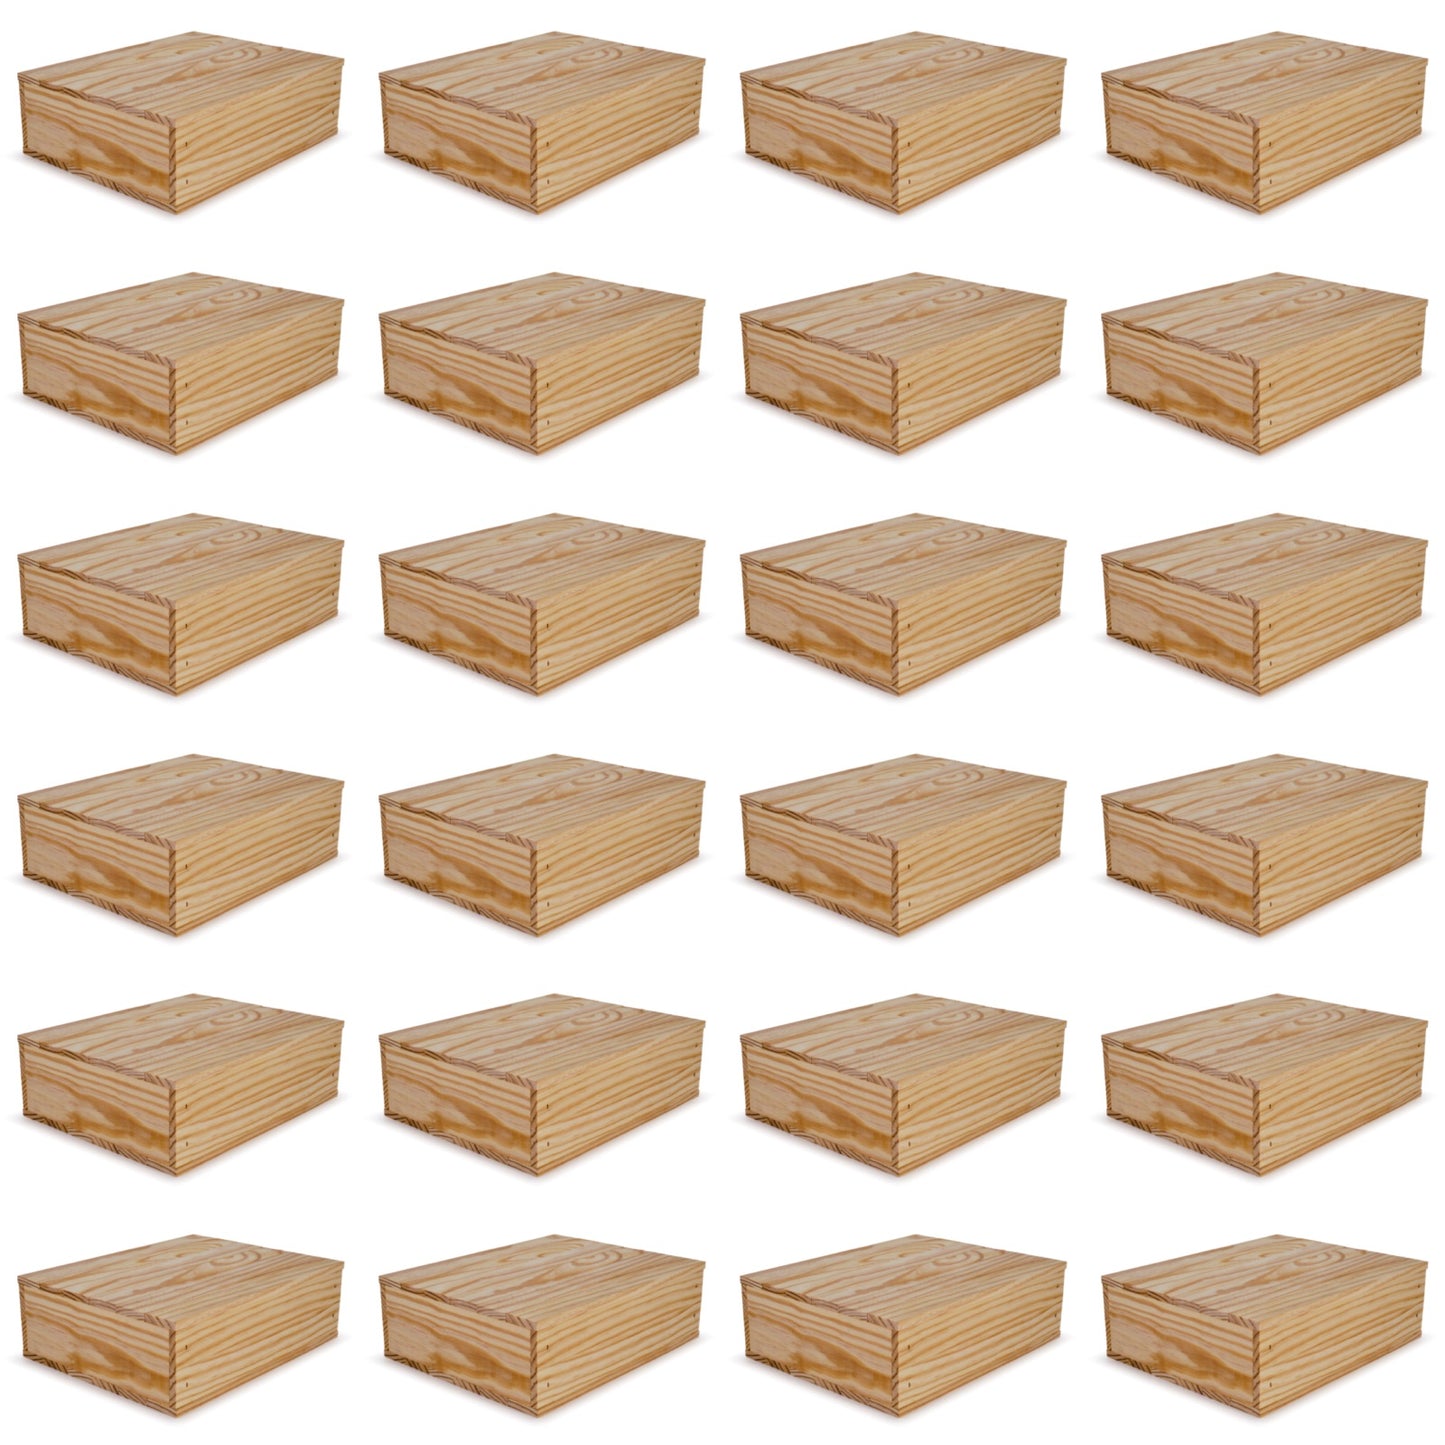 24 Small wooden crates with lid 12x9.75x3.5